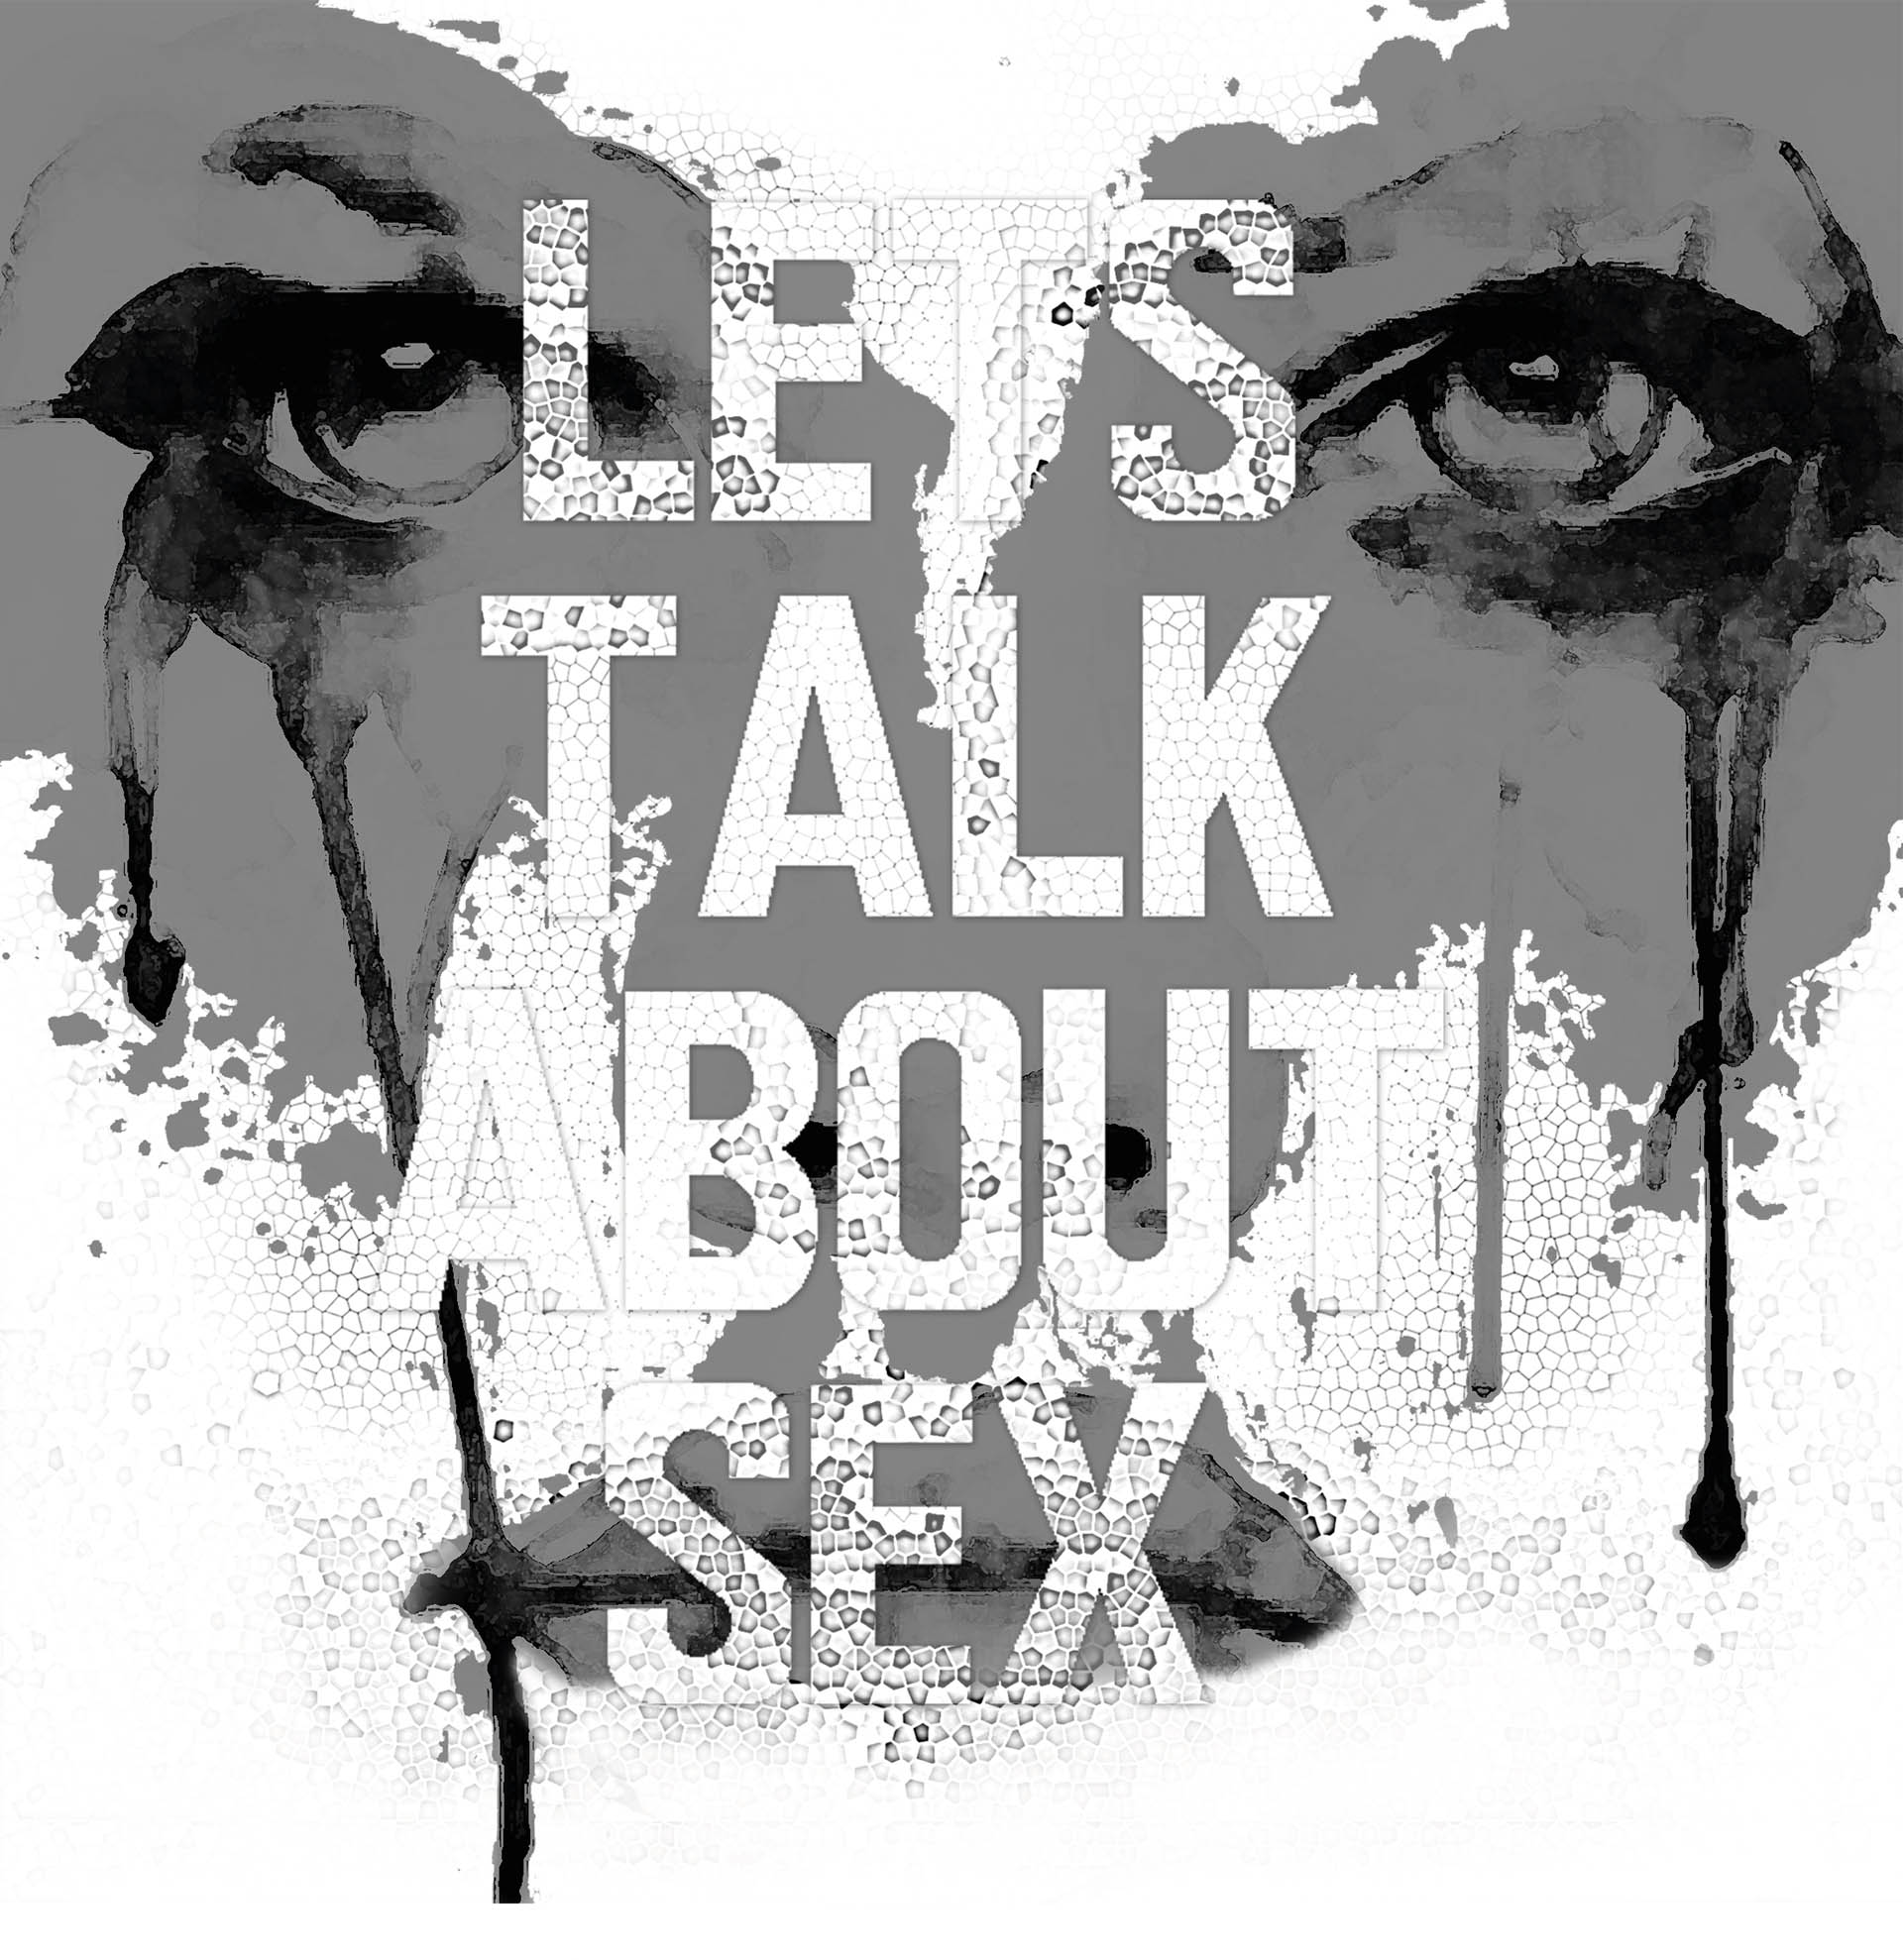 Let’s talk about sex, a self-initiated book design that talks about the systematic silencing of sex issues in India